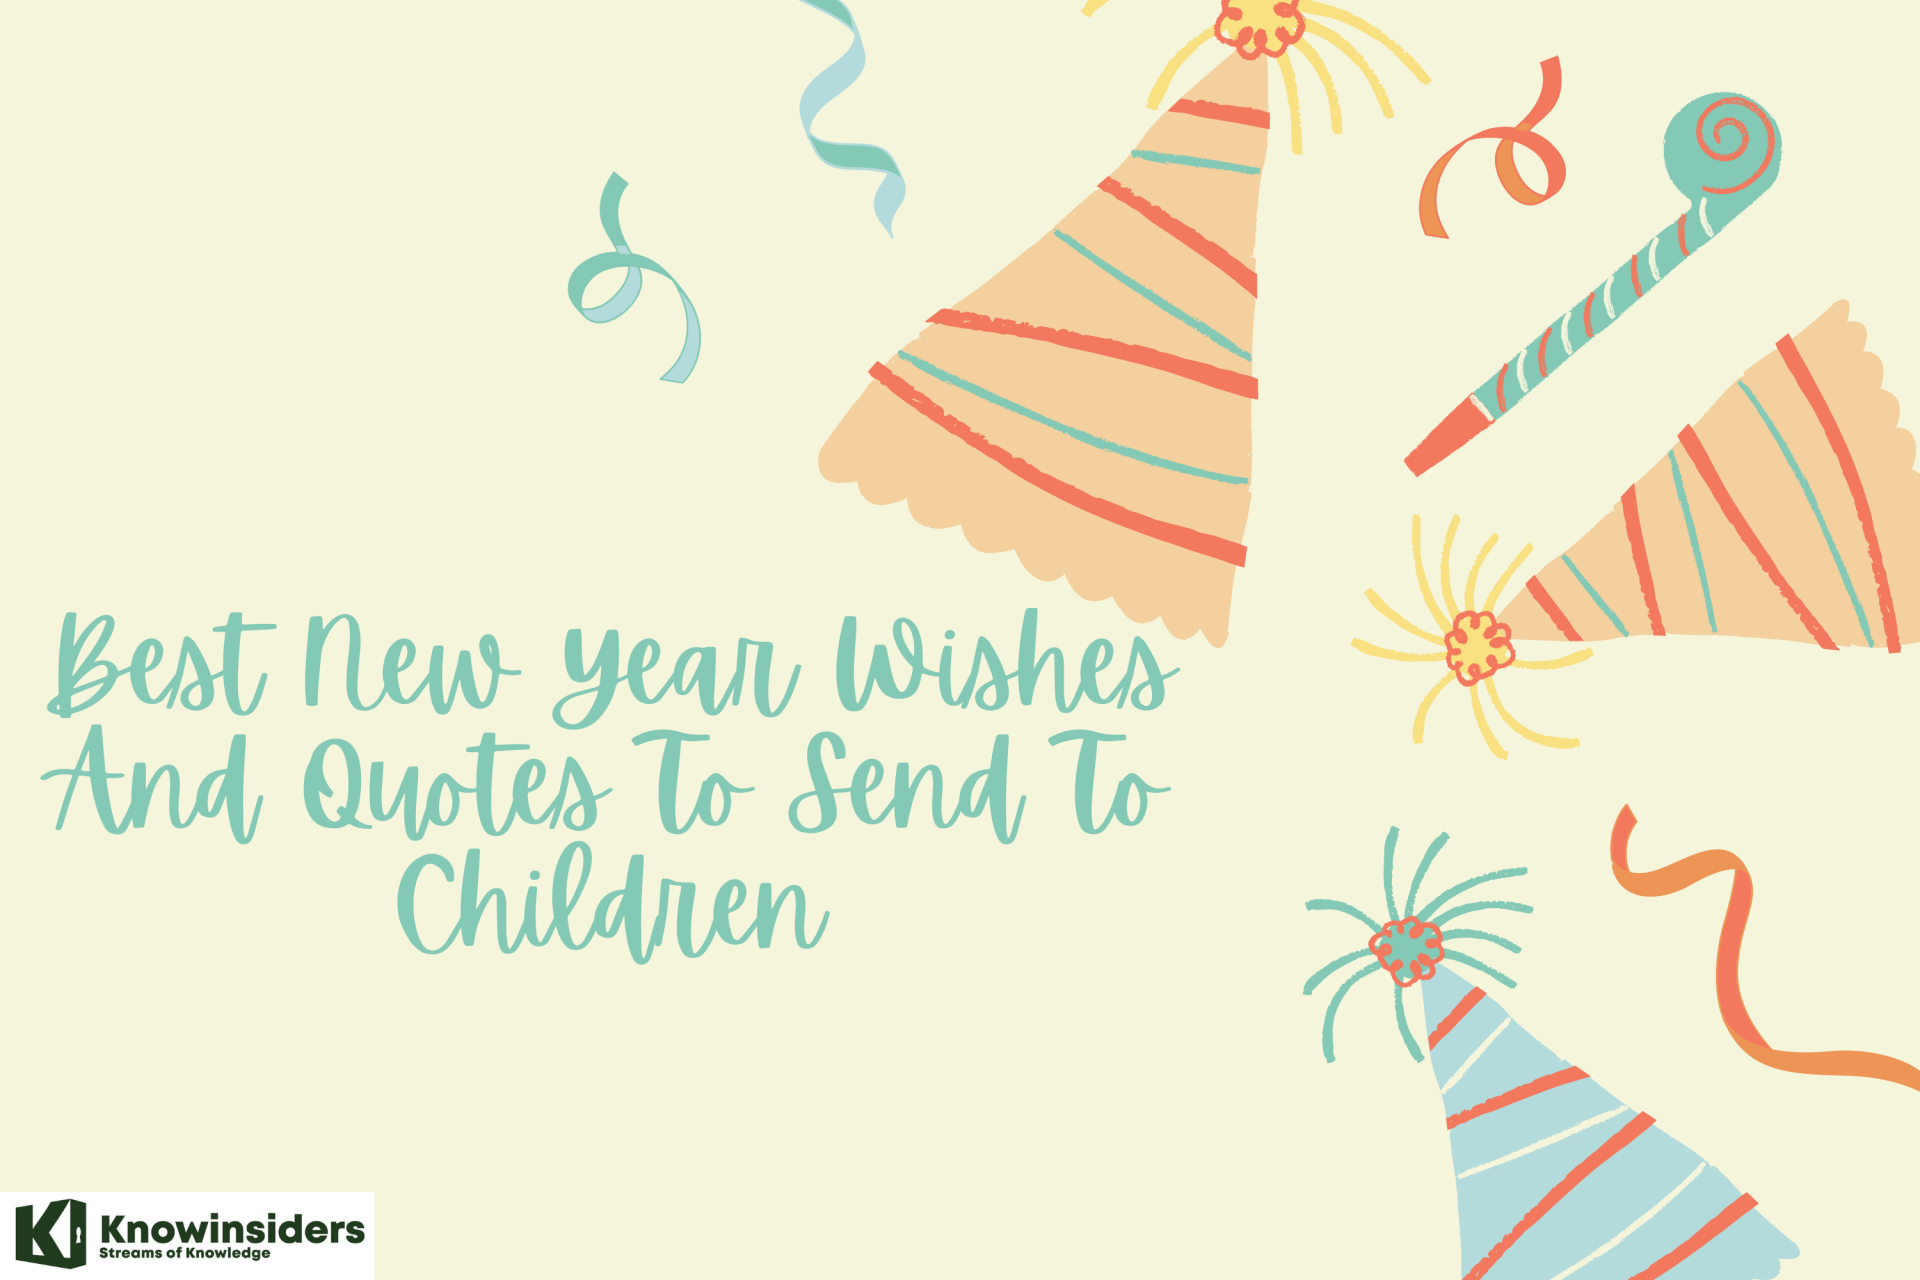 Best New Year Wishes And Quotes To Send To Children